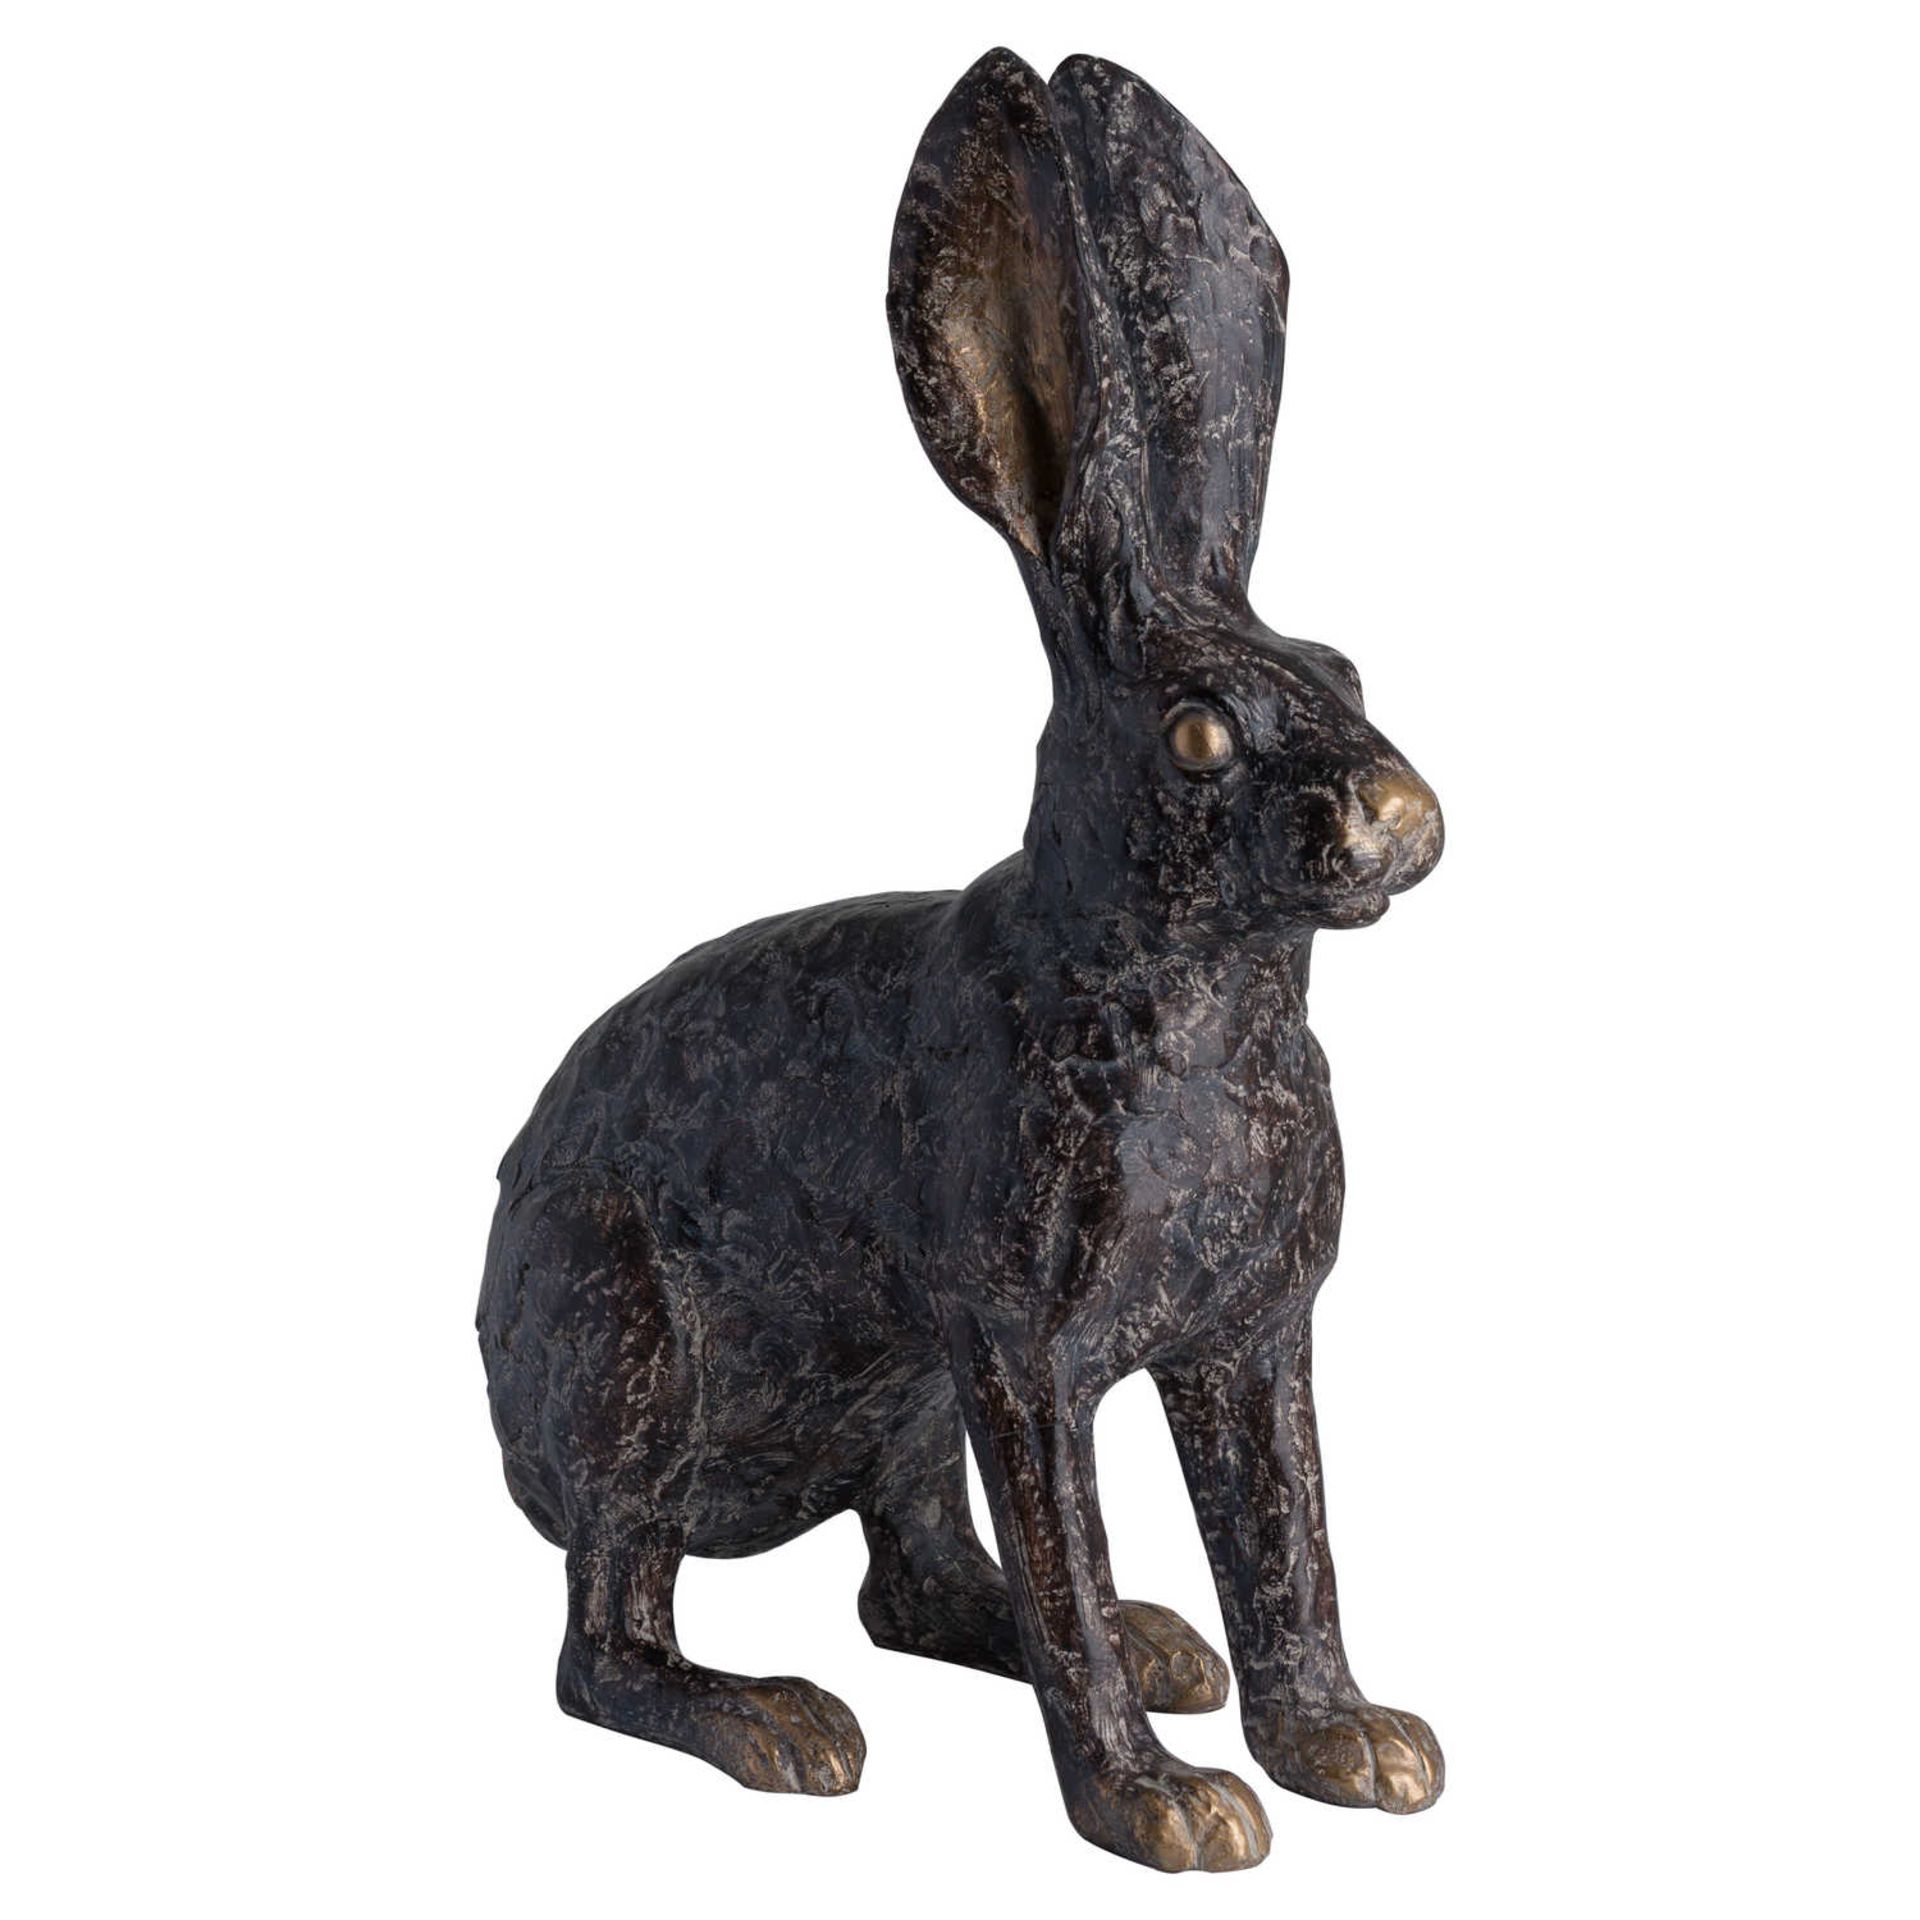 Artistic Hare Ornament With Metallic Detail 39cm High. This charming character would make a great